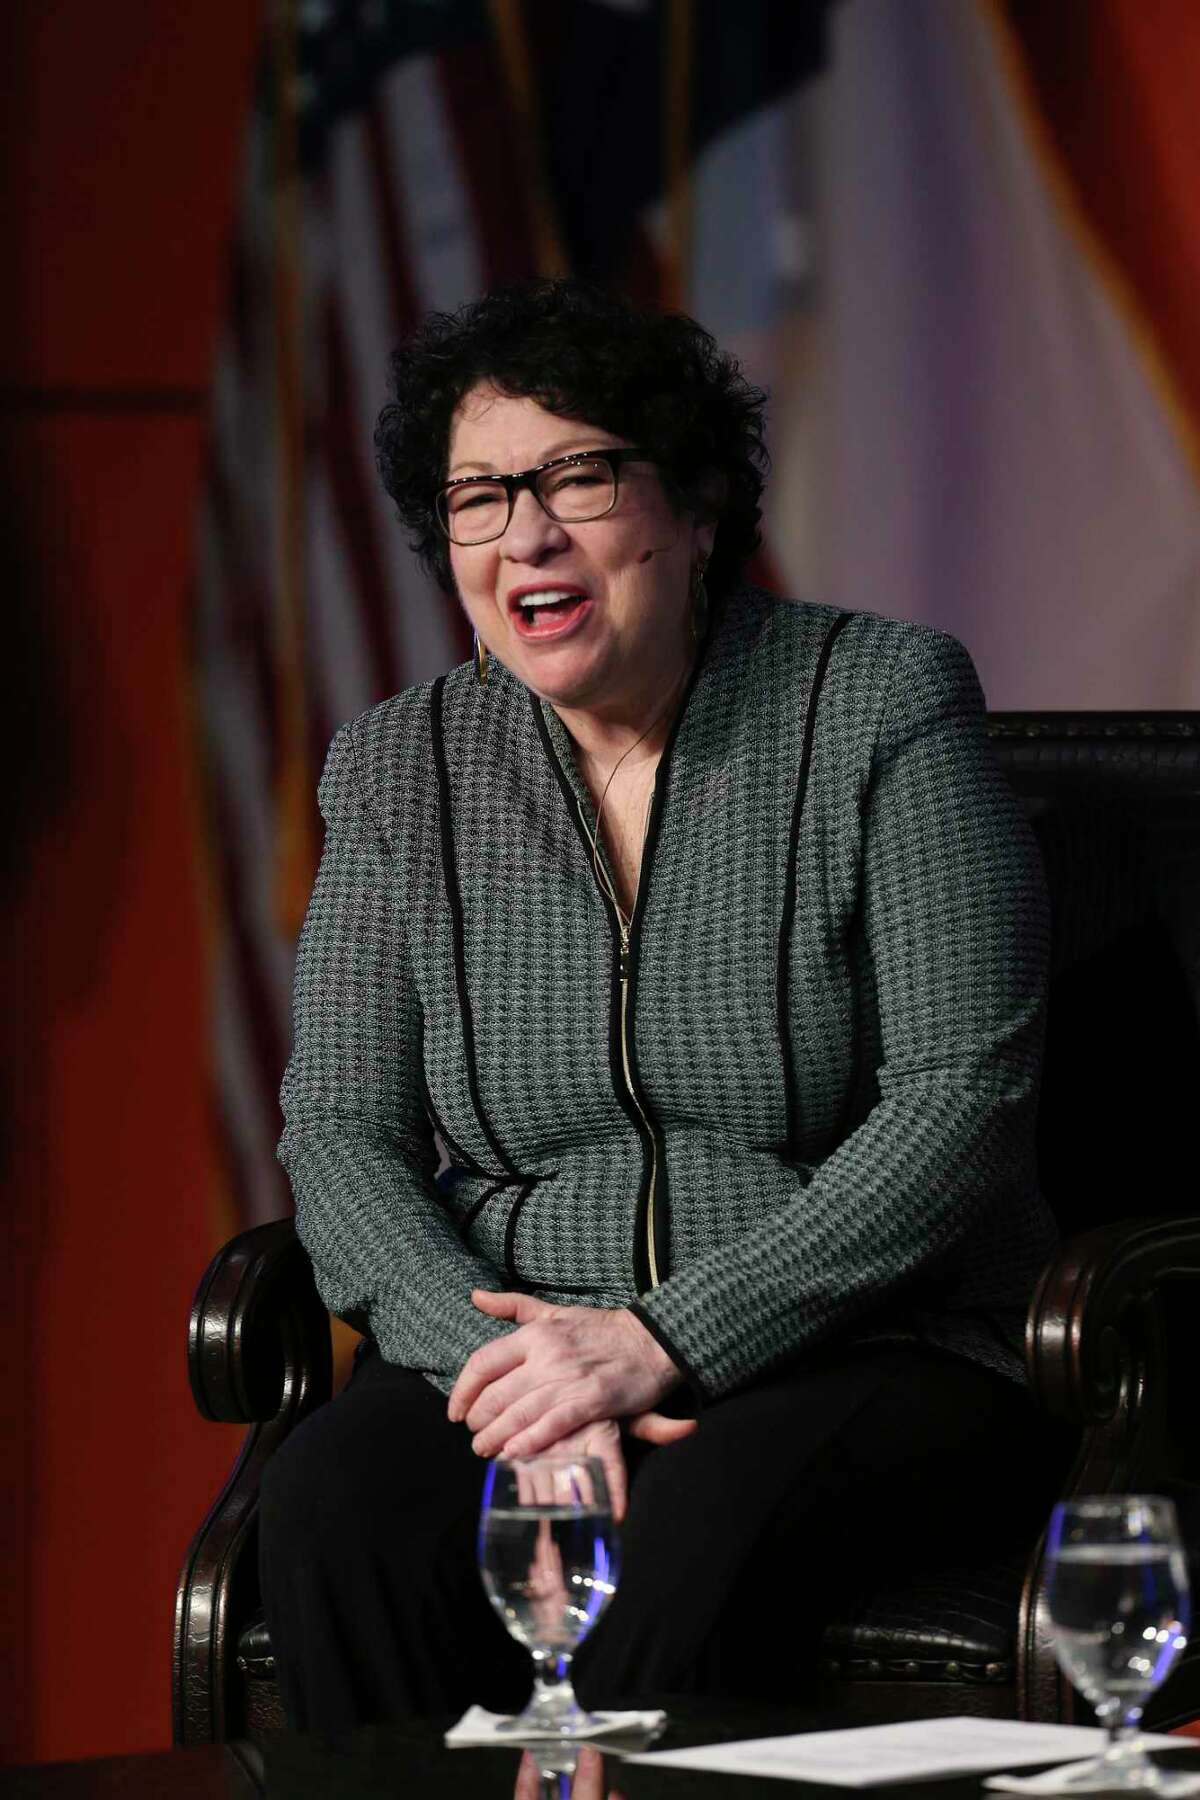 U.S. Supreme Court Associate Justice Sonia Sotomayor talks with students, faculty and staff during a visit to UTSA in 2018.